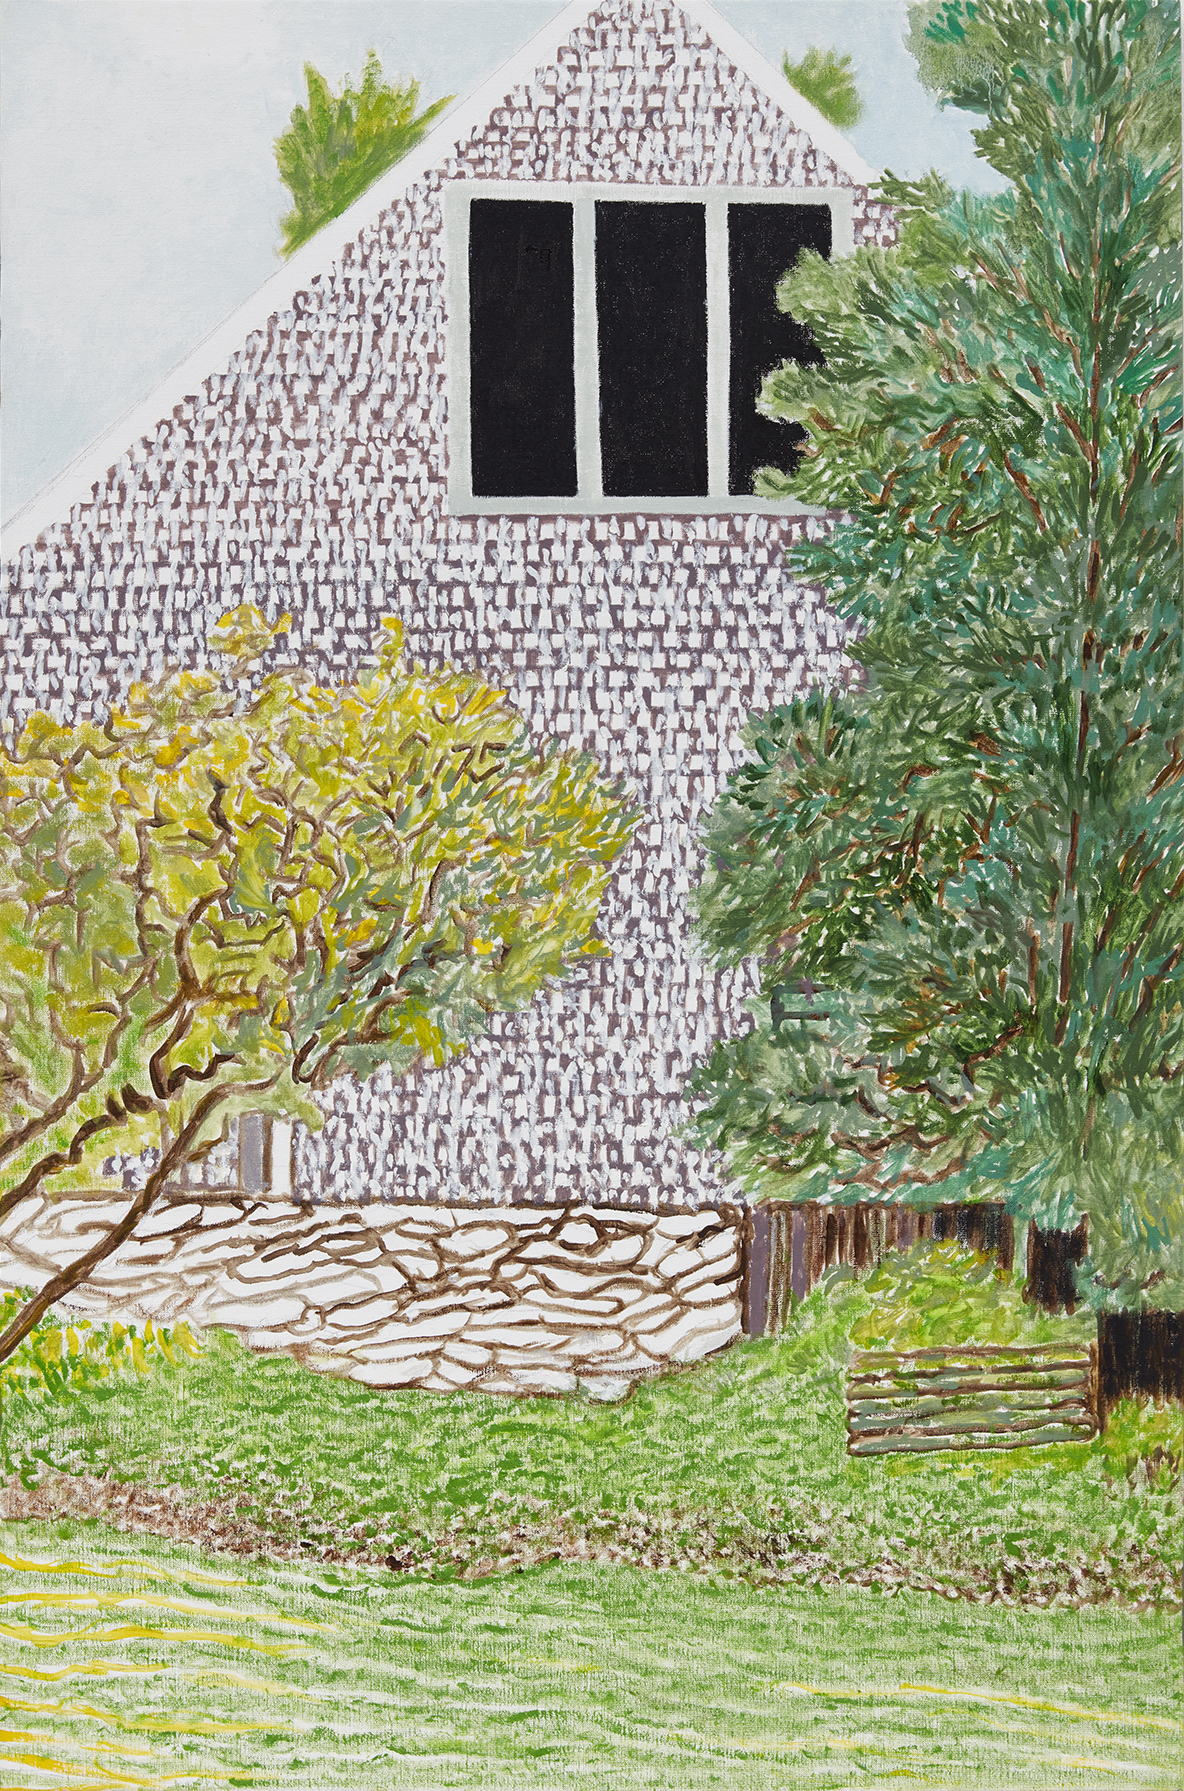 Yvonne Jacquette, "Back of Barn," 2022 Oil on linen 43 x 28 1/2 inches.